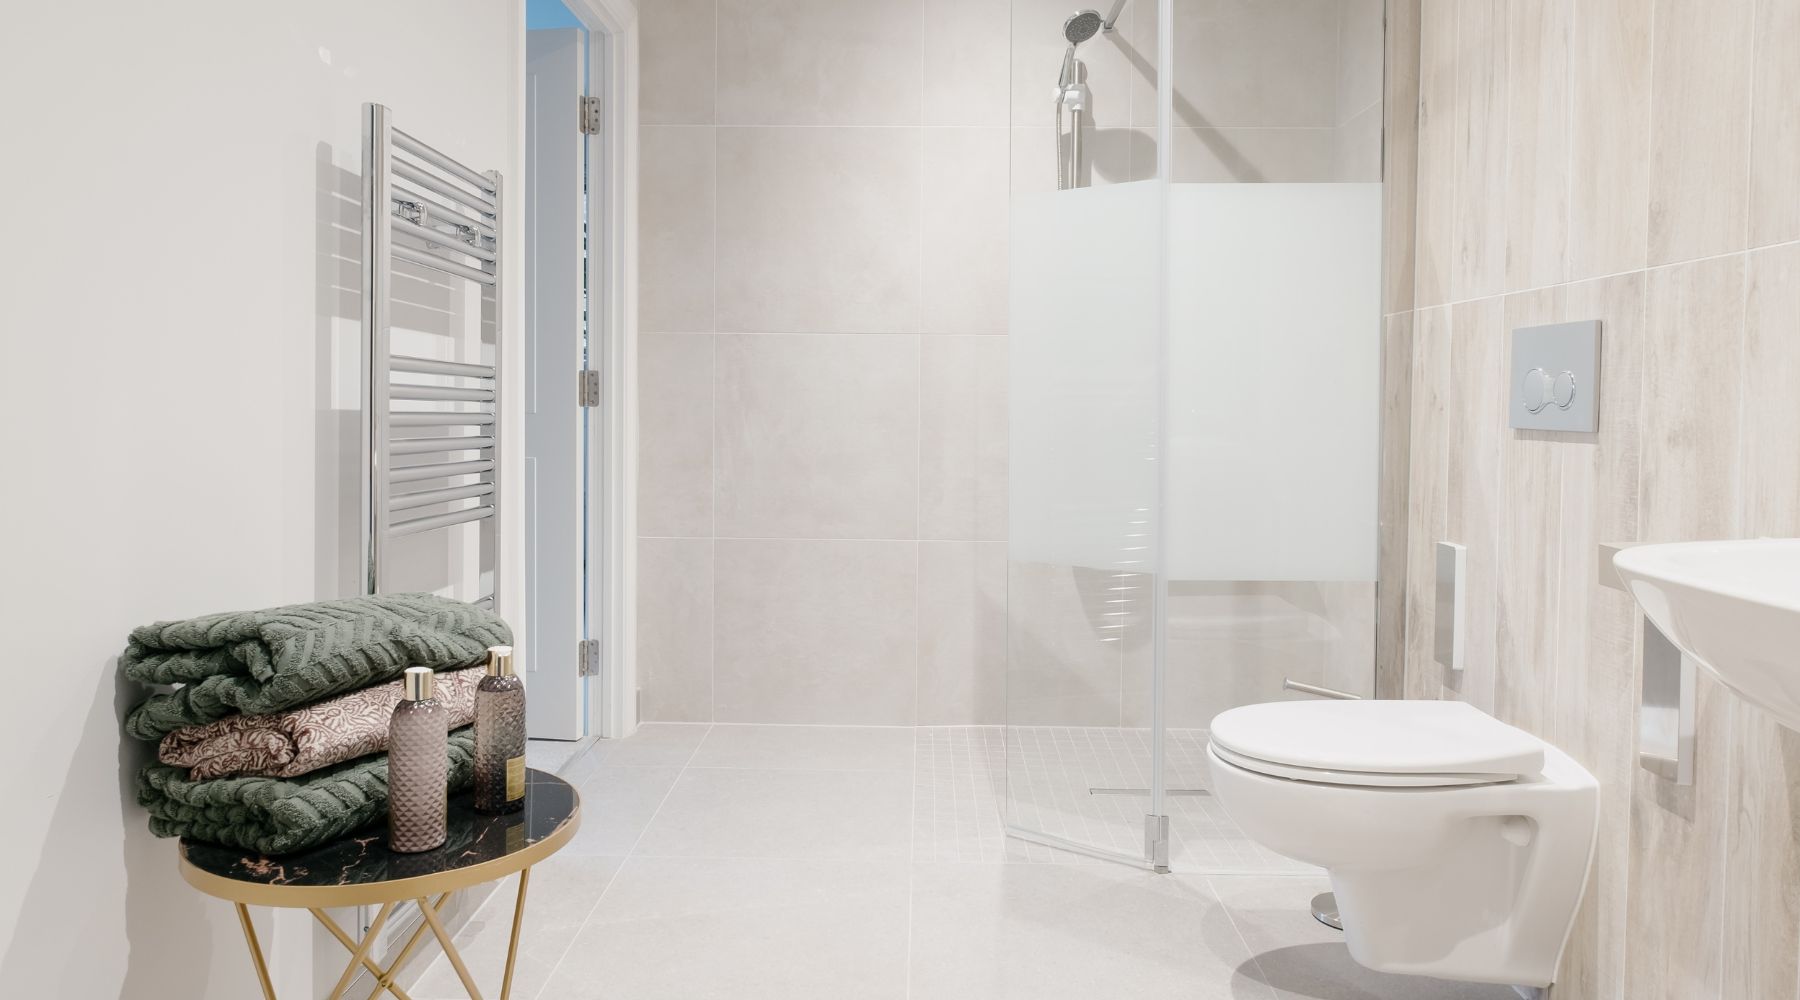 Trinity Lodge future-proofed, accessible apartment wetroom/bathroom featuring thermostatically controlled shower valve, supportive L-shaped shower riser and wall plates which enable additional grab rails to be added for extra support or to mount a shower seat onto